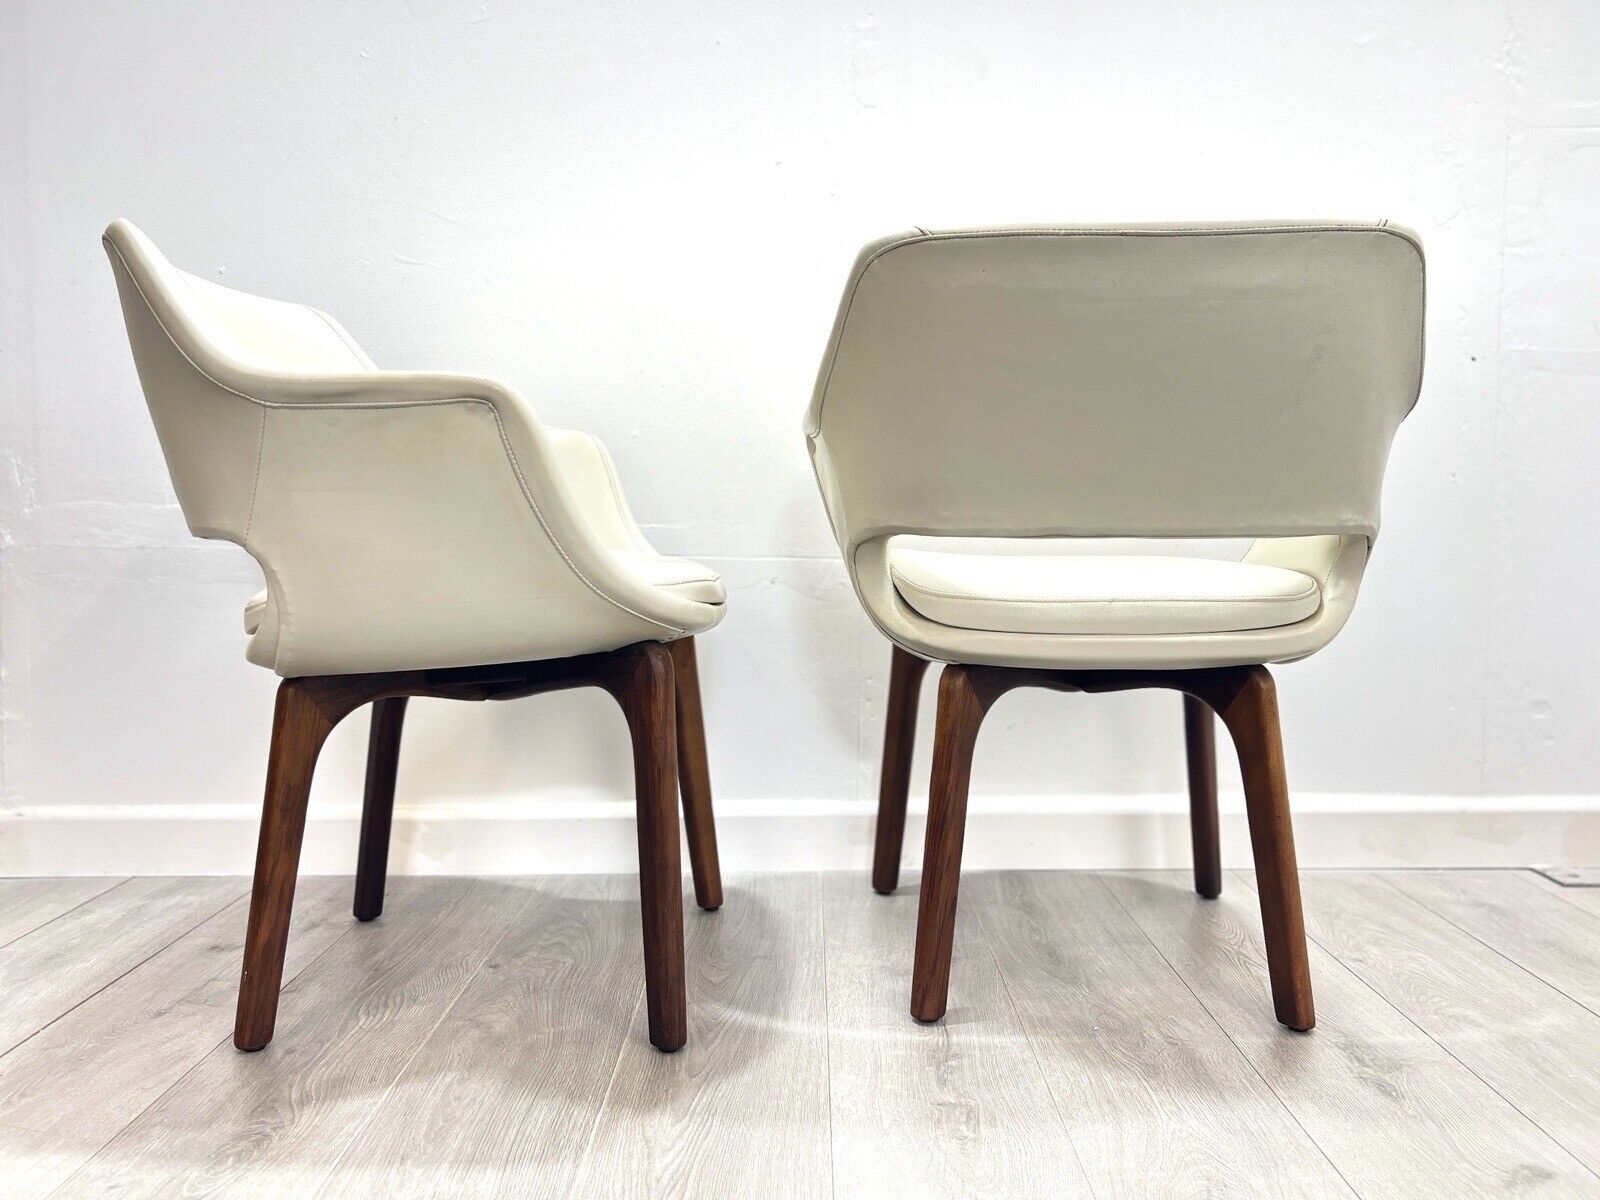 Pair of Danish De Luxe Kilta White Leather and Teak Dining Chairs